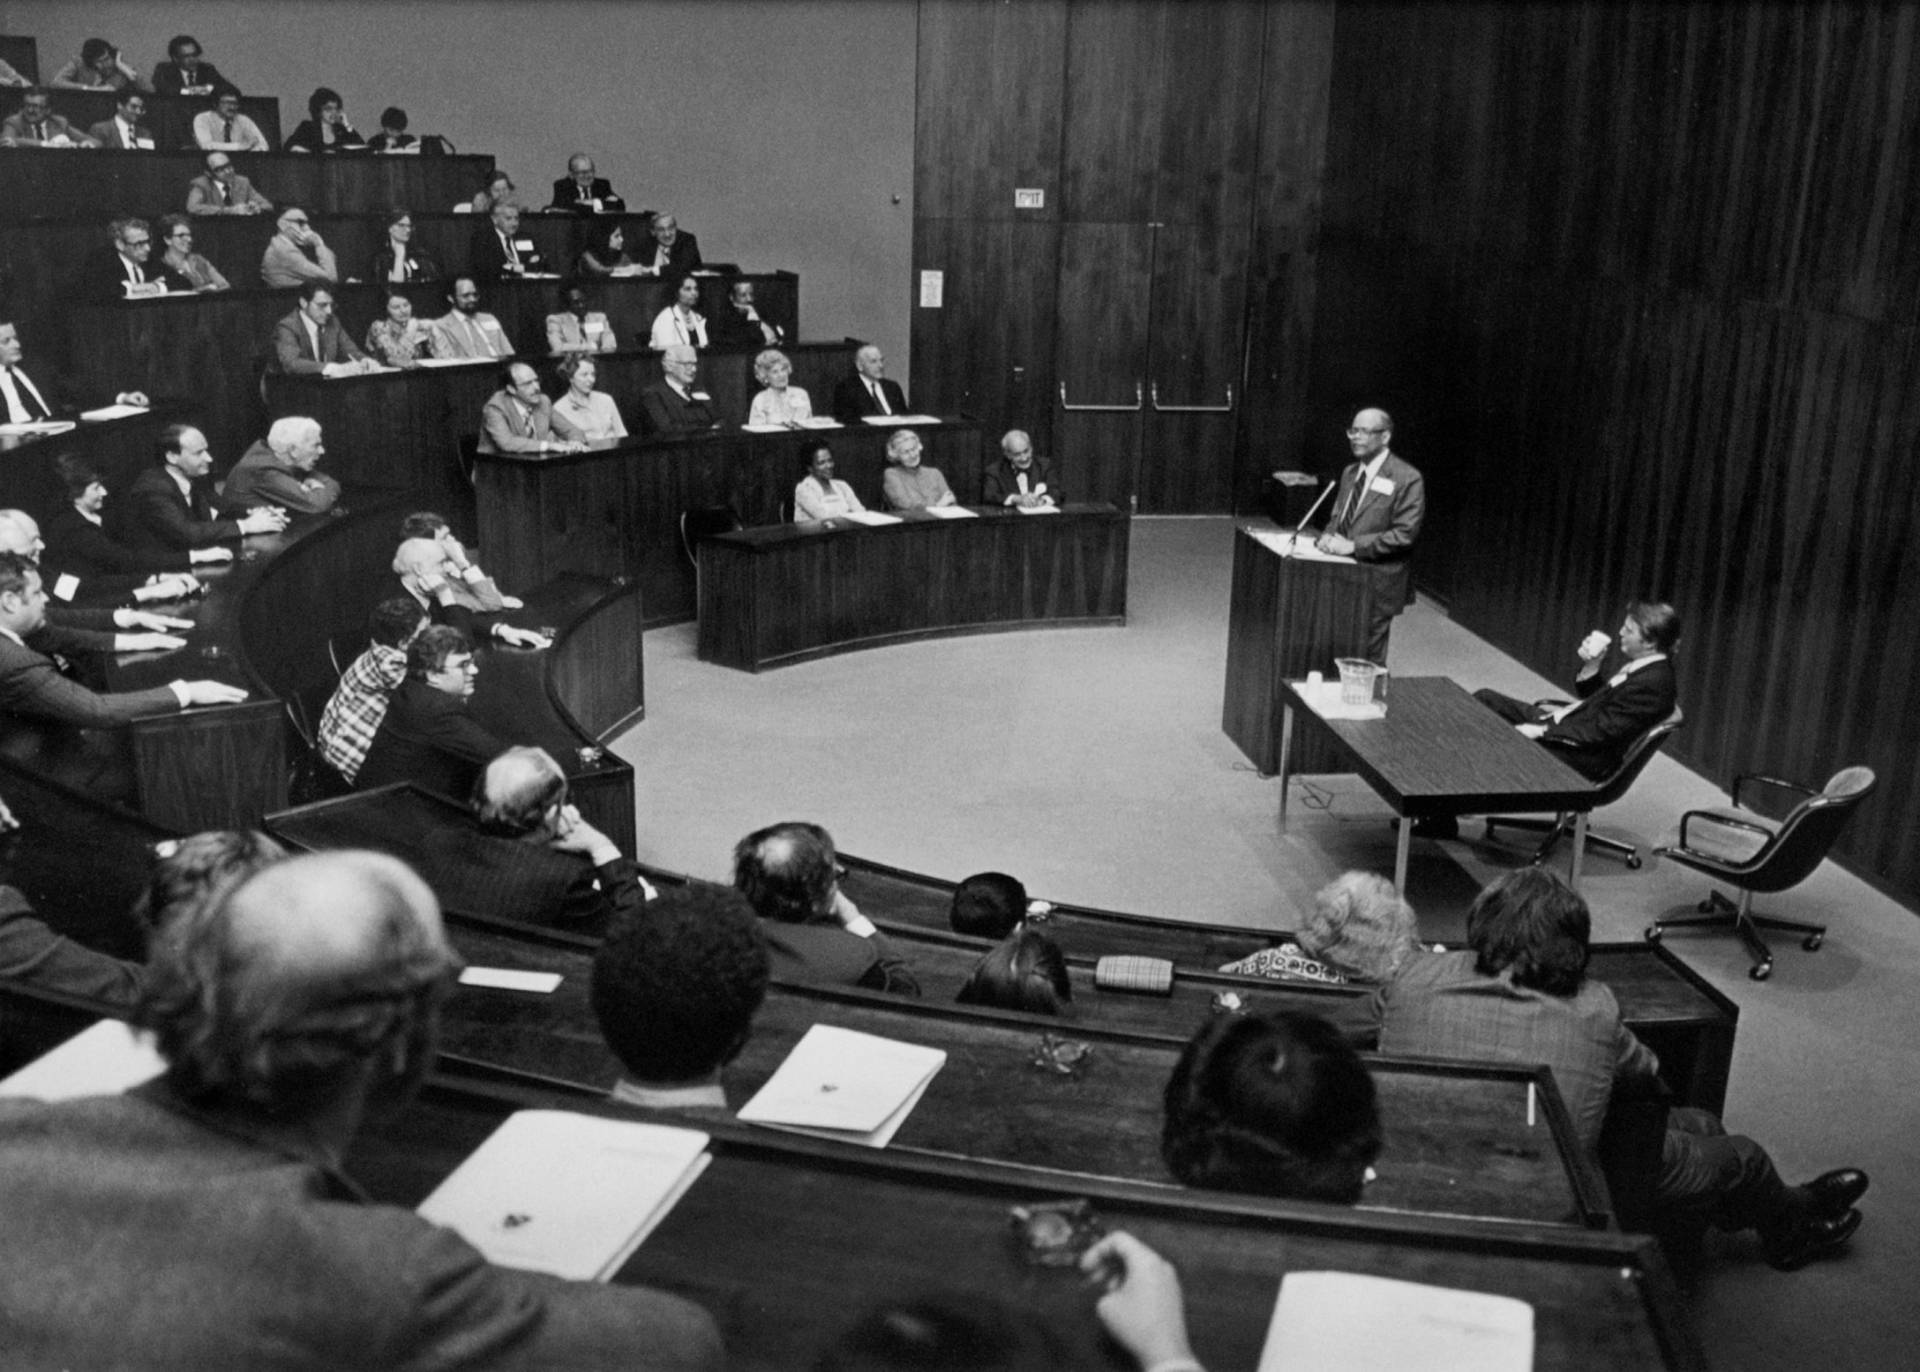 Sir Arthur Lewis giving lecture in auditorium at the Woodrow Wilson School in 1970s